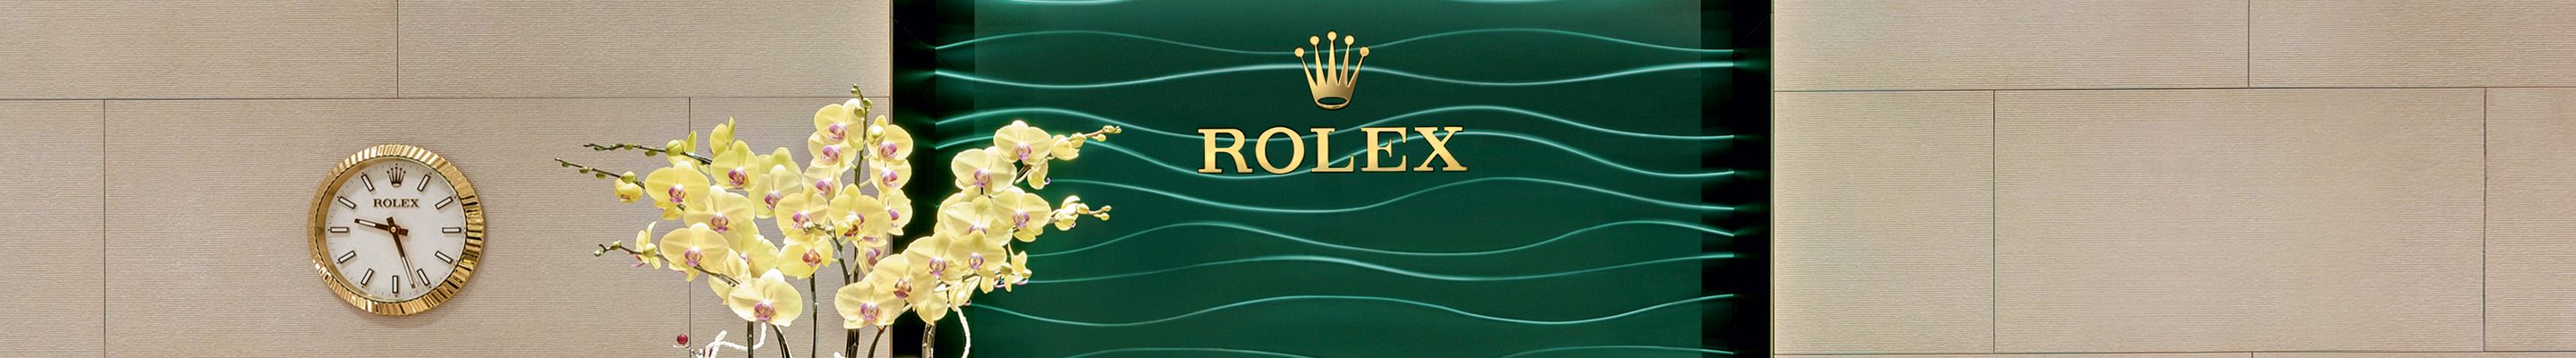 Detail of Rolex boutique with green graphic background